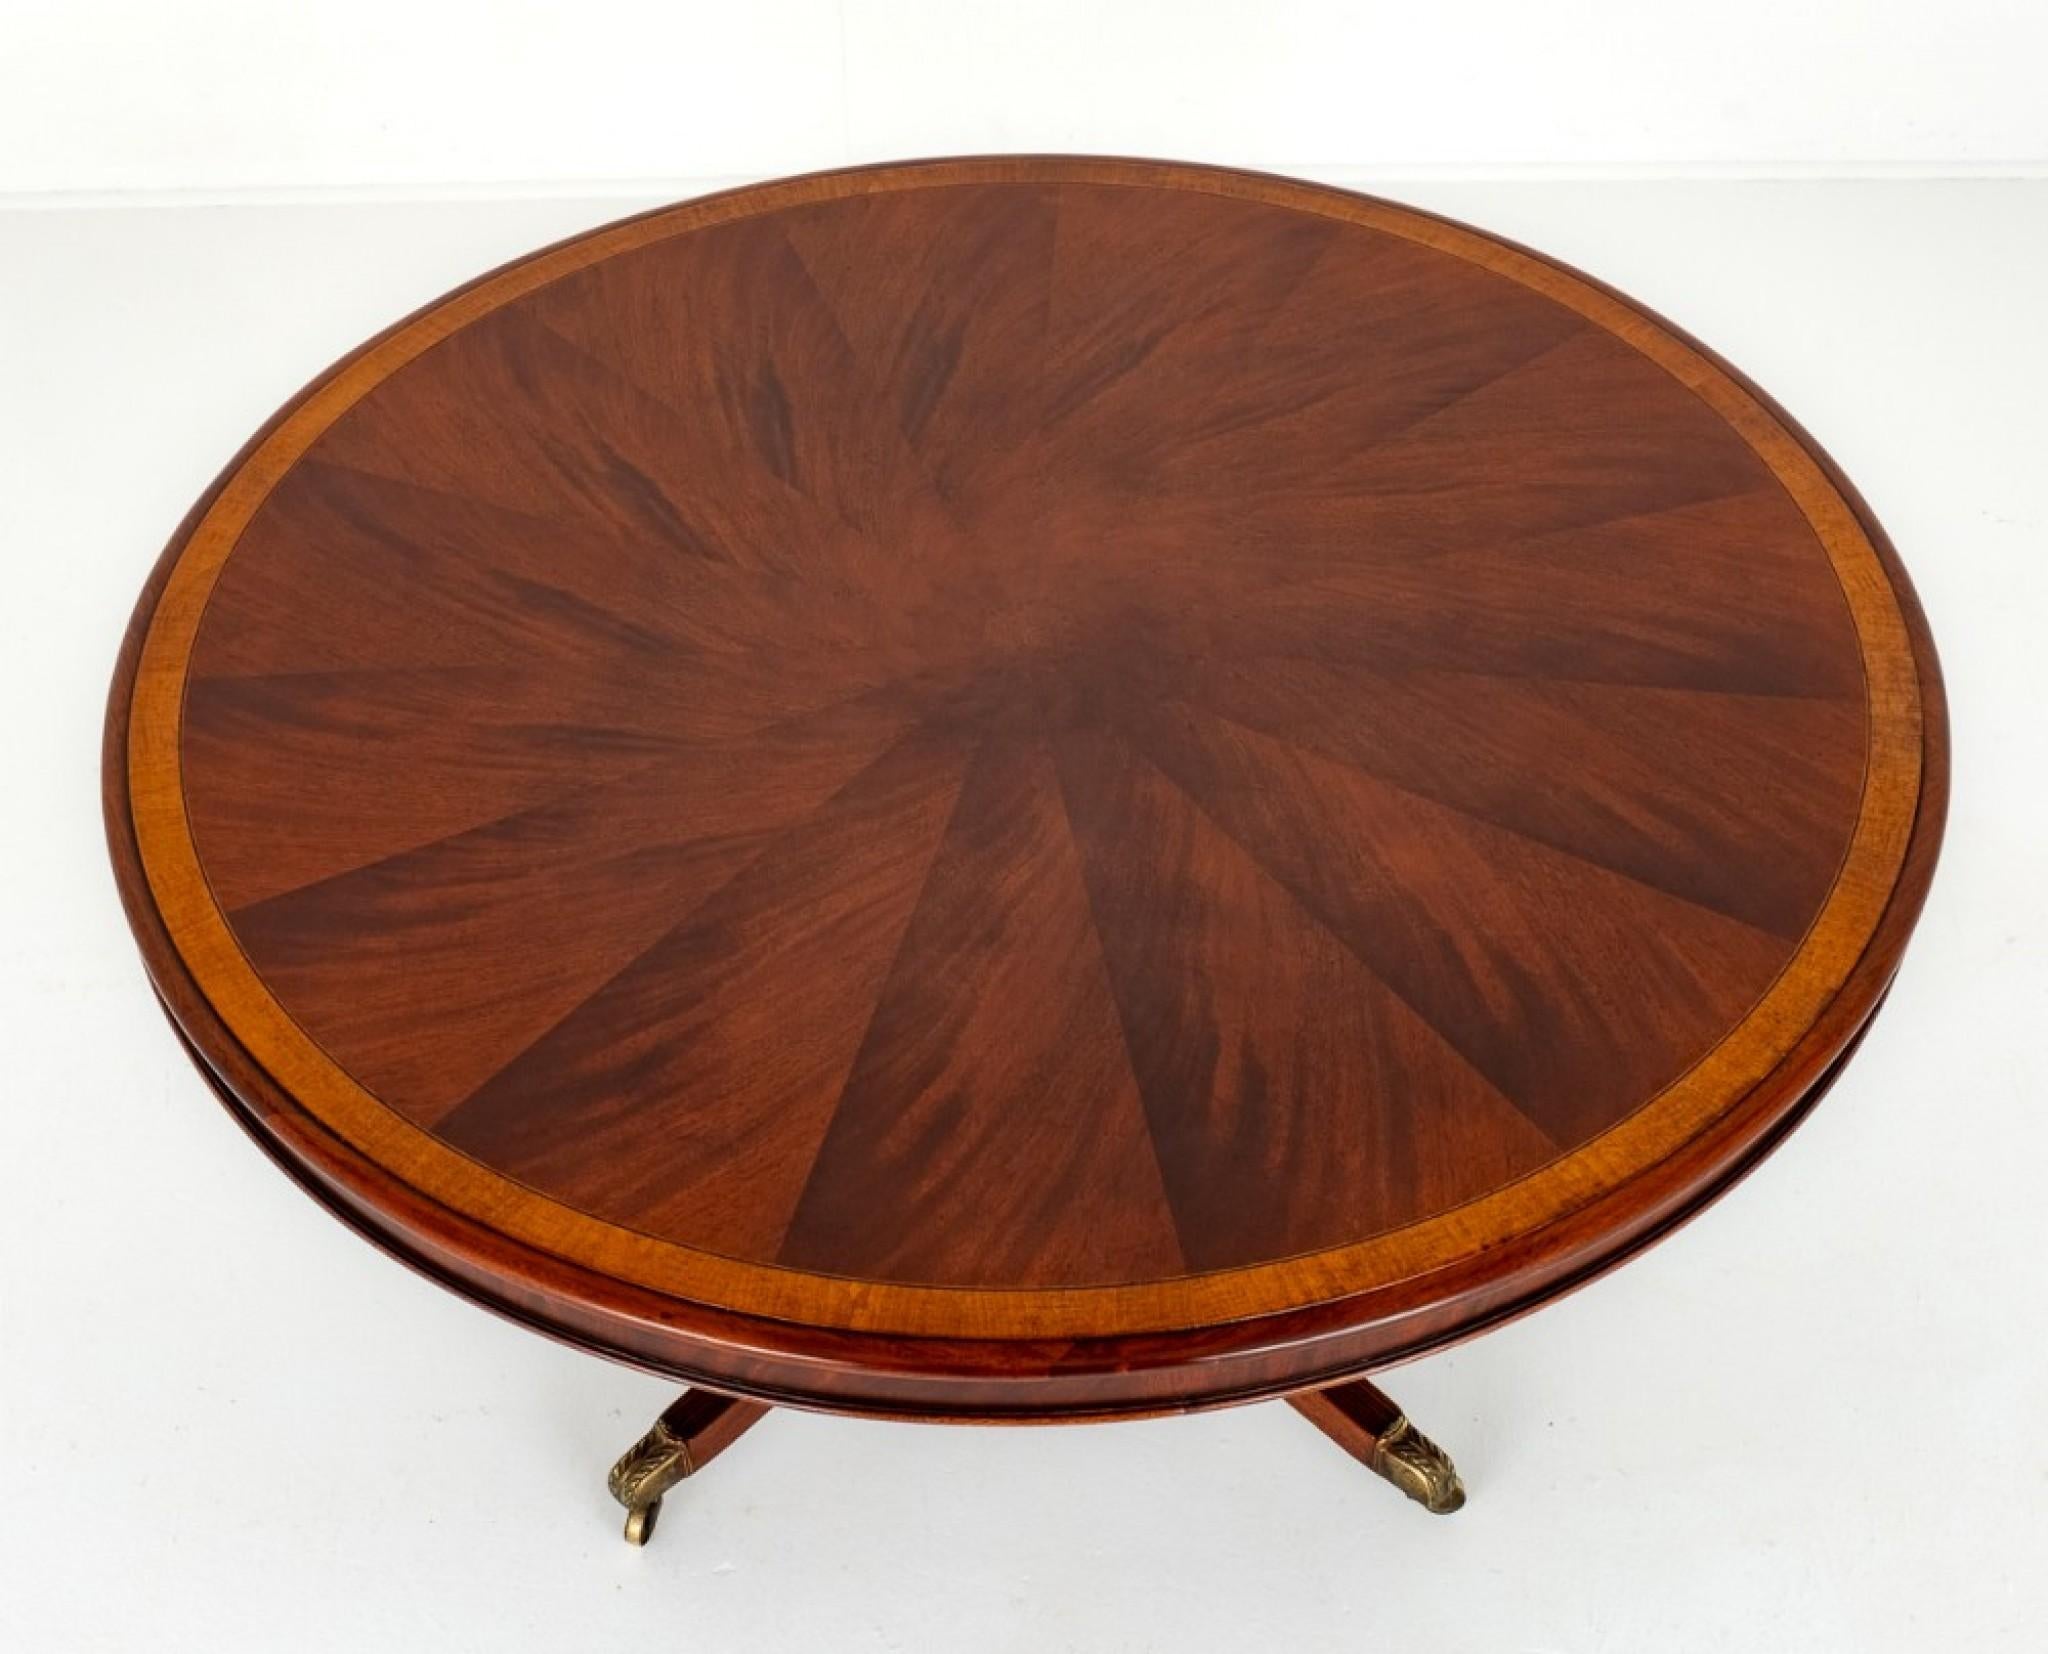 Regency Style Mahogany Centre Table.
The Mahogany Top of the Table Being of a Segmented Form and Features Wonderful Mahogany Timbers, Satinwood Crossbanding and Ebony and Boxwood Line Inlays.
Circa 1900
The Base of the Table Having Elegant Fluted